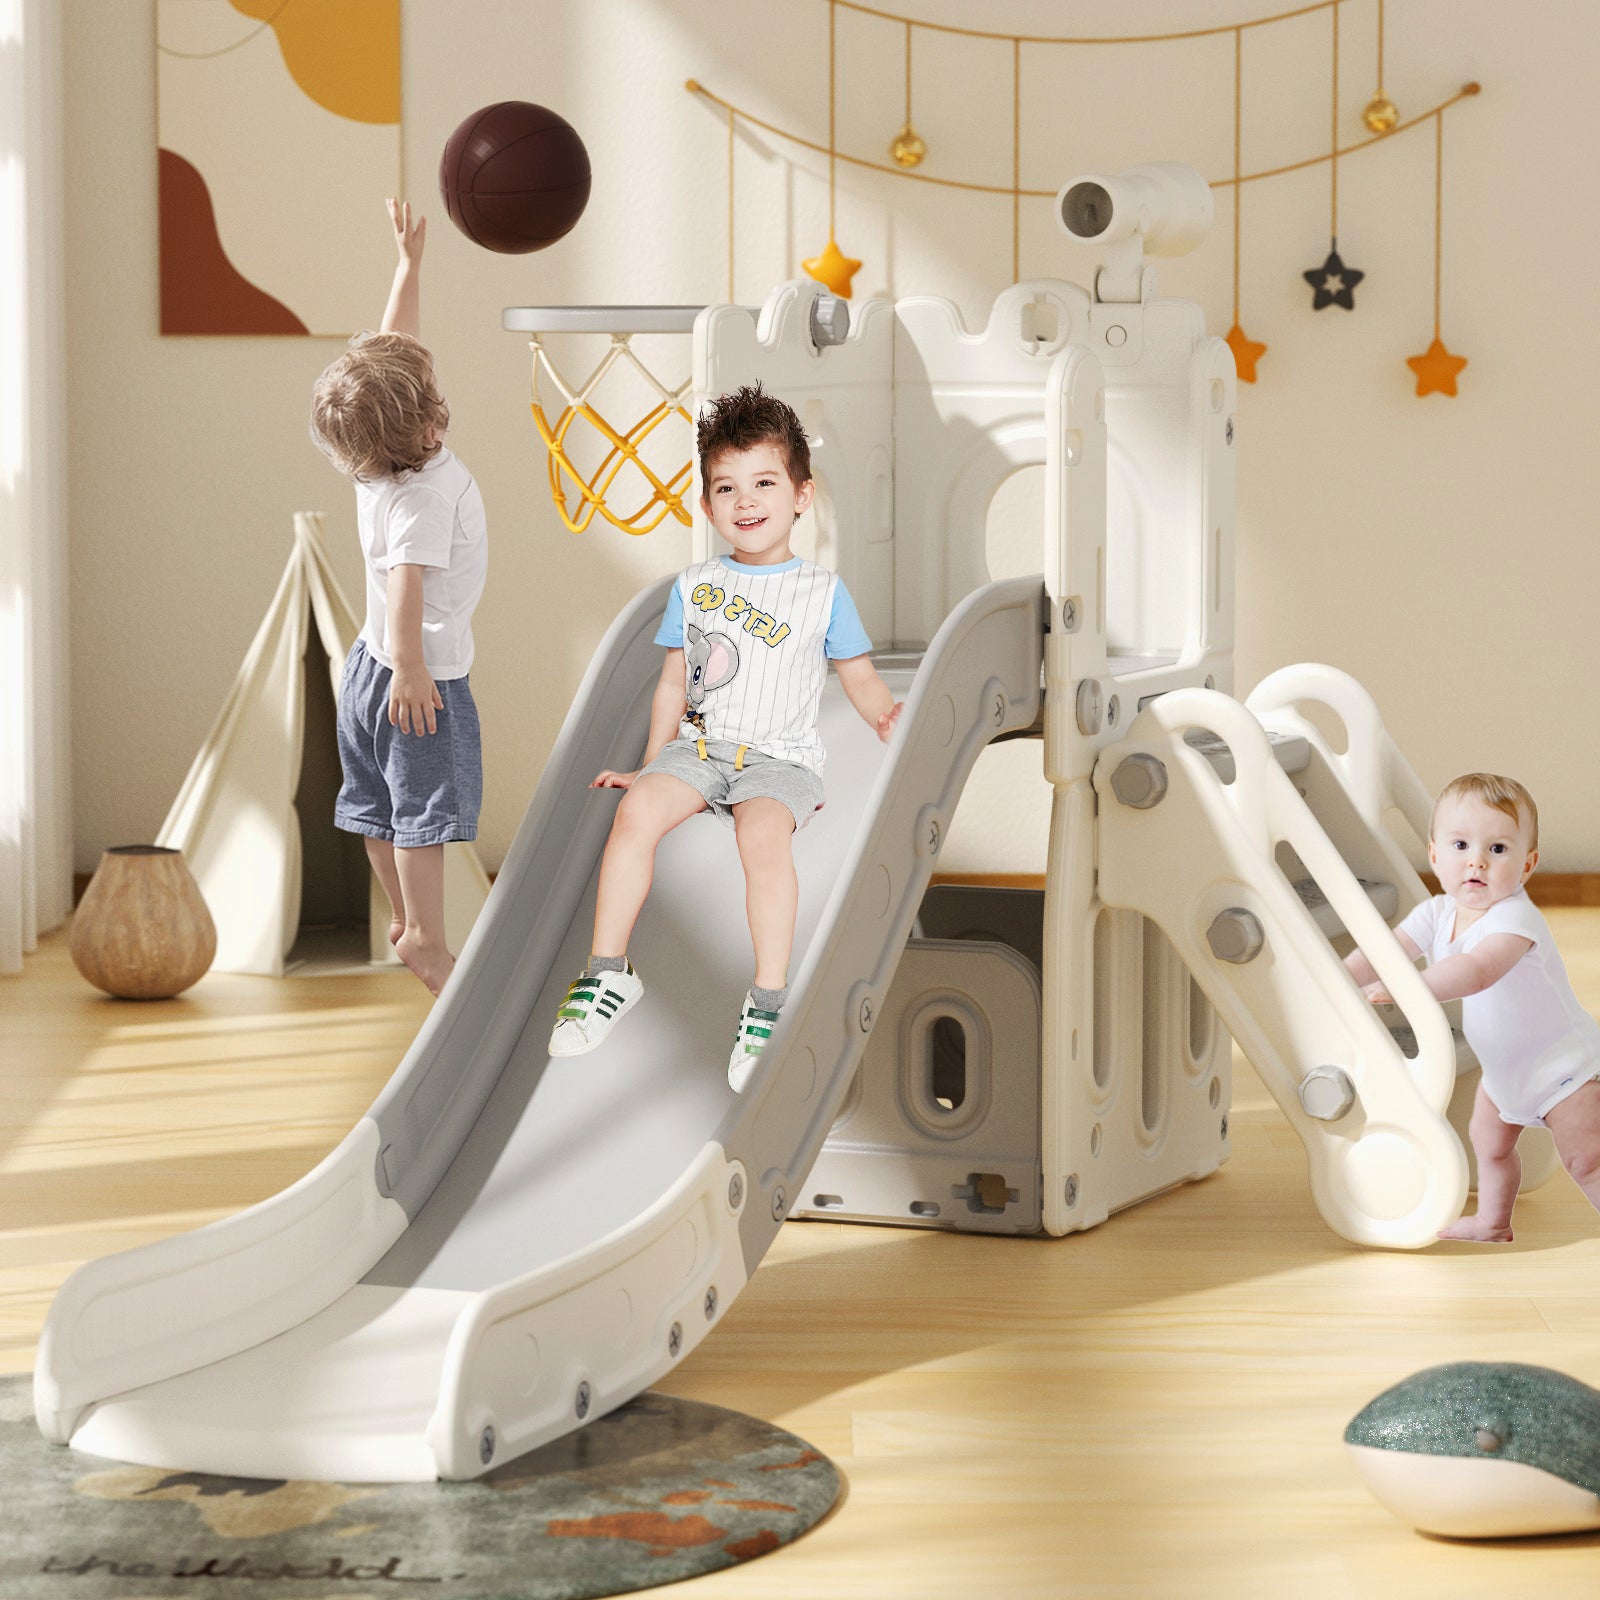 XJD 5-in-1 Toddler Slide Set in Gray Freestanding Climber Playset for Ages 1-3, Outdoor/Indoor Playset with Basketball Hoop and Ball